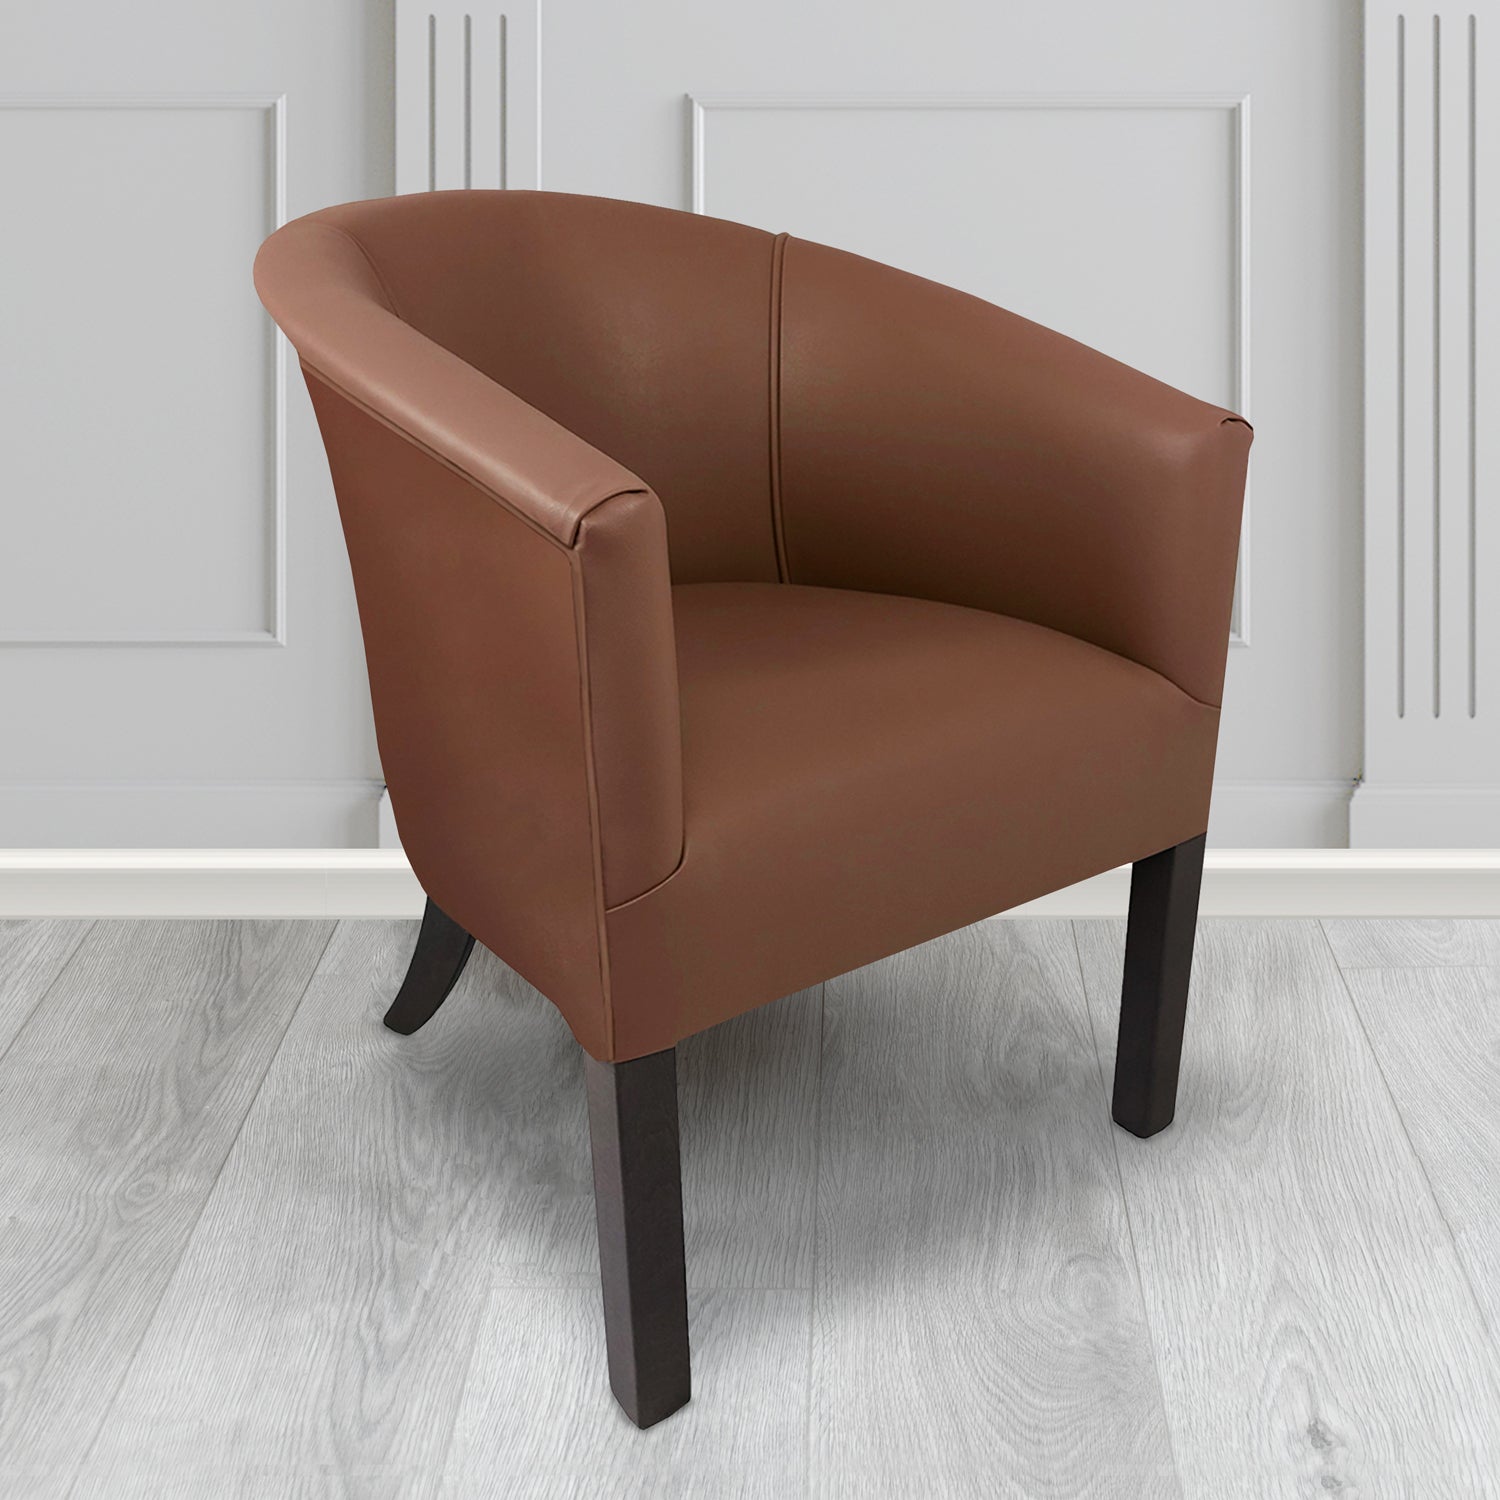 Lewisham Tub Chair in Agua Paint Pot Chestnut Crib 5 Faux Leather - Antimicrobial, Stain Resistant & Waterproof - The Tub Chair Shop